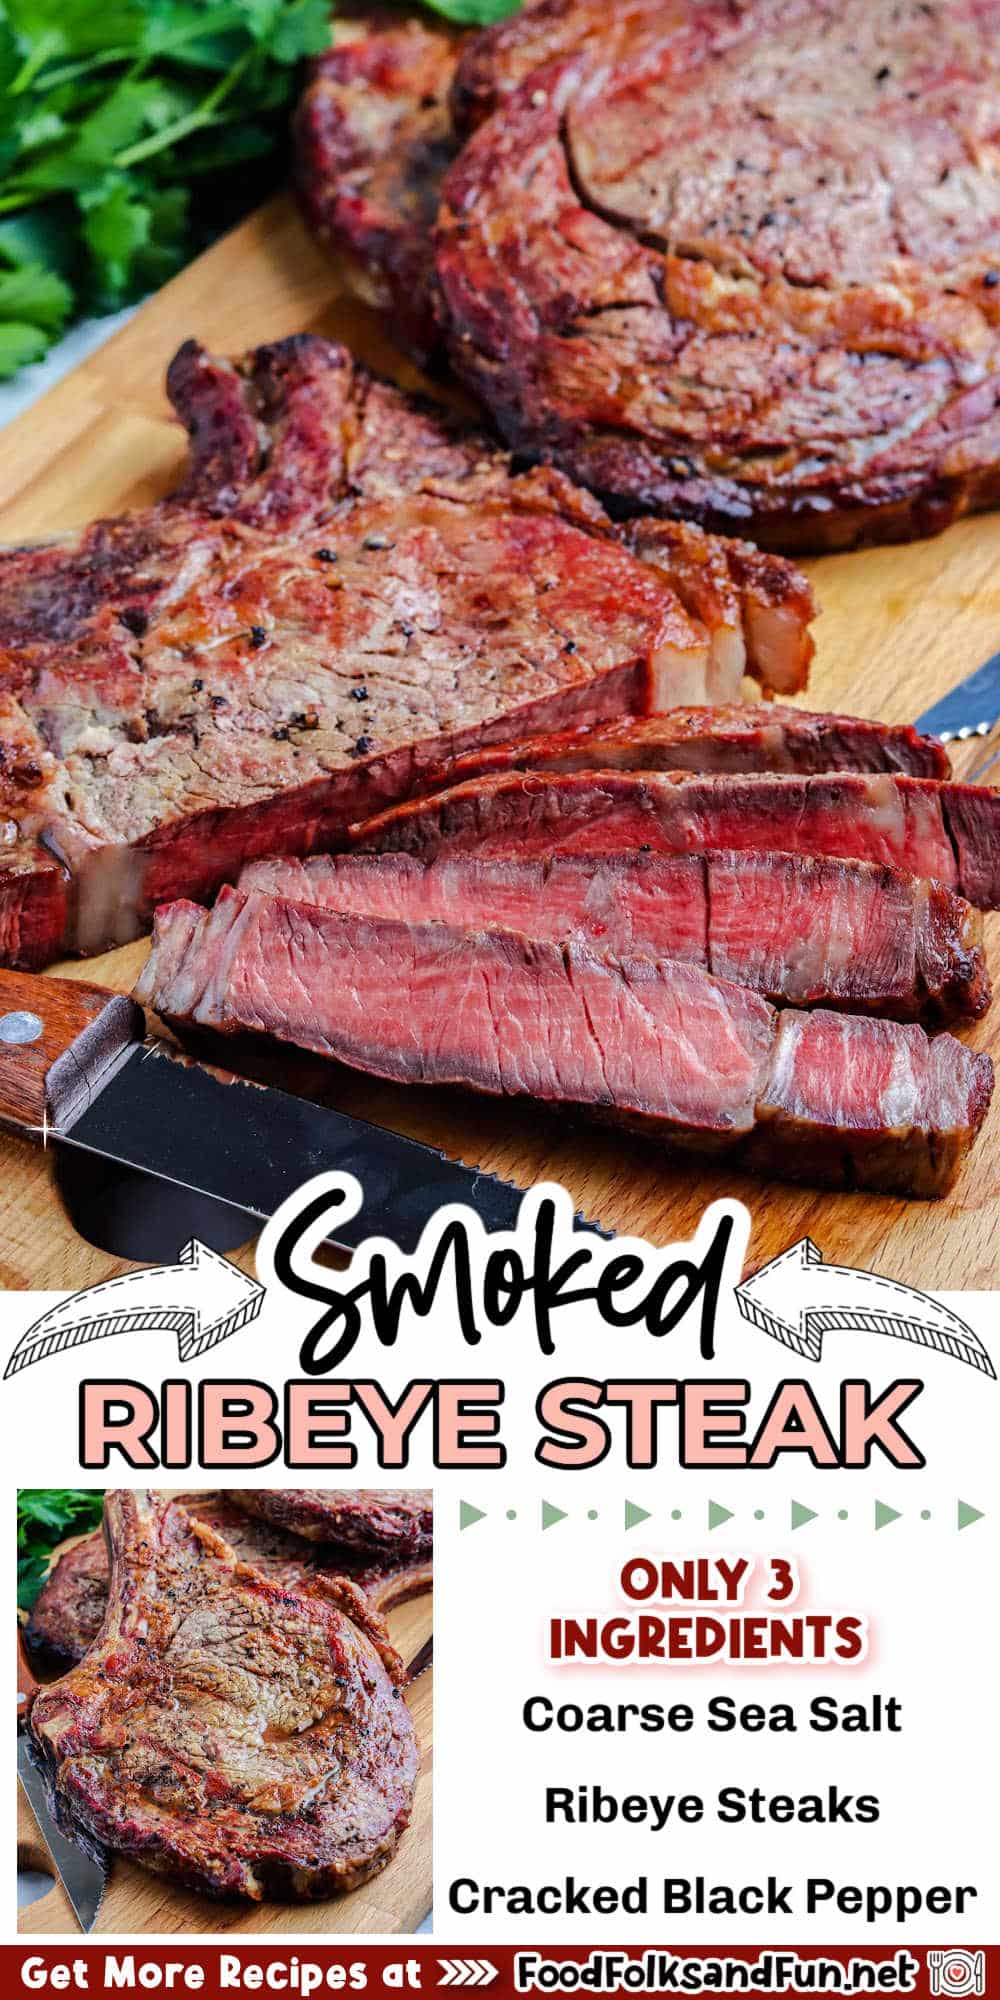 Elevate your steak game with my mouthwatering recipe for Smoked Ribeye Steak. It's perfectly seasoned and grilled to perfection.  via @foodfolksandfun